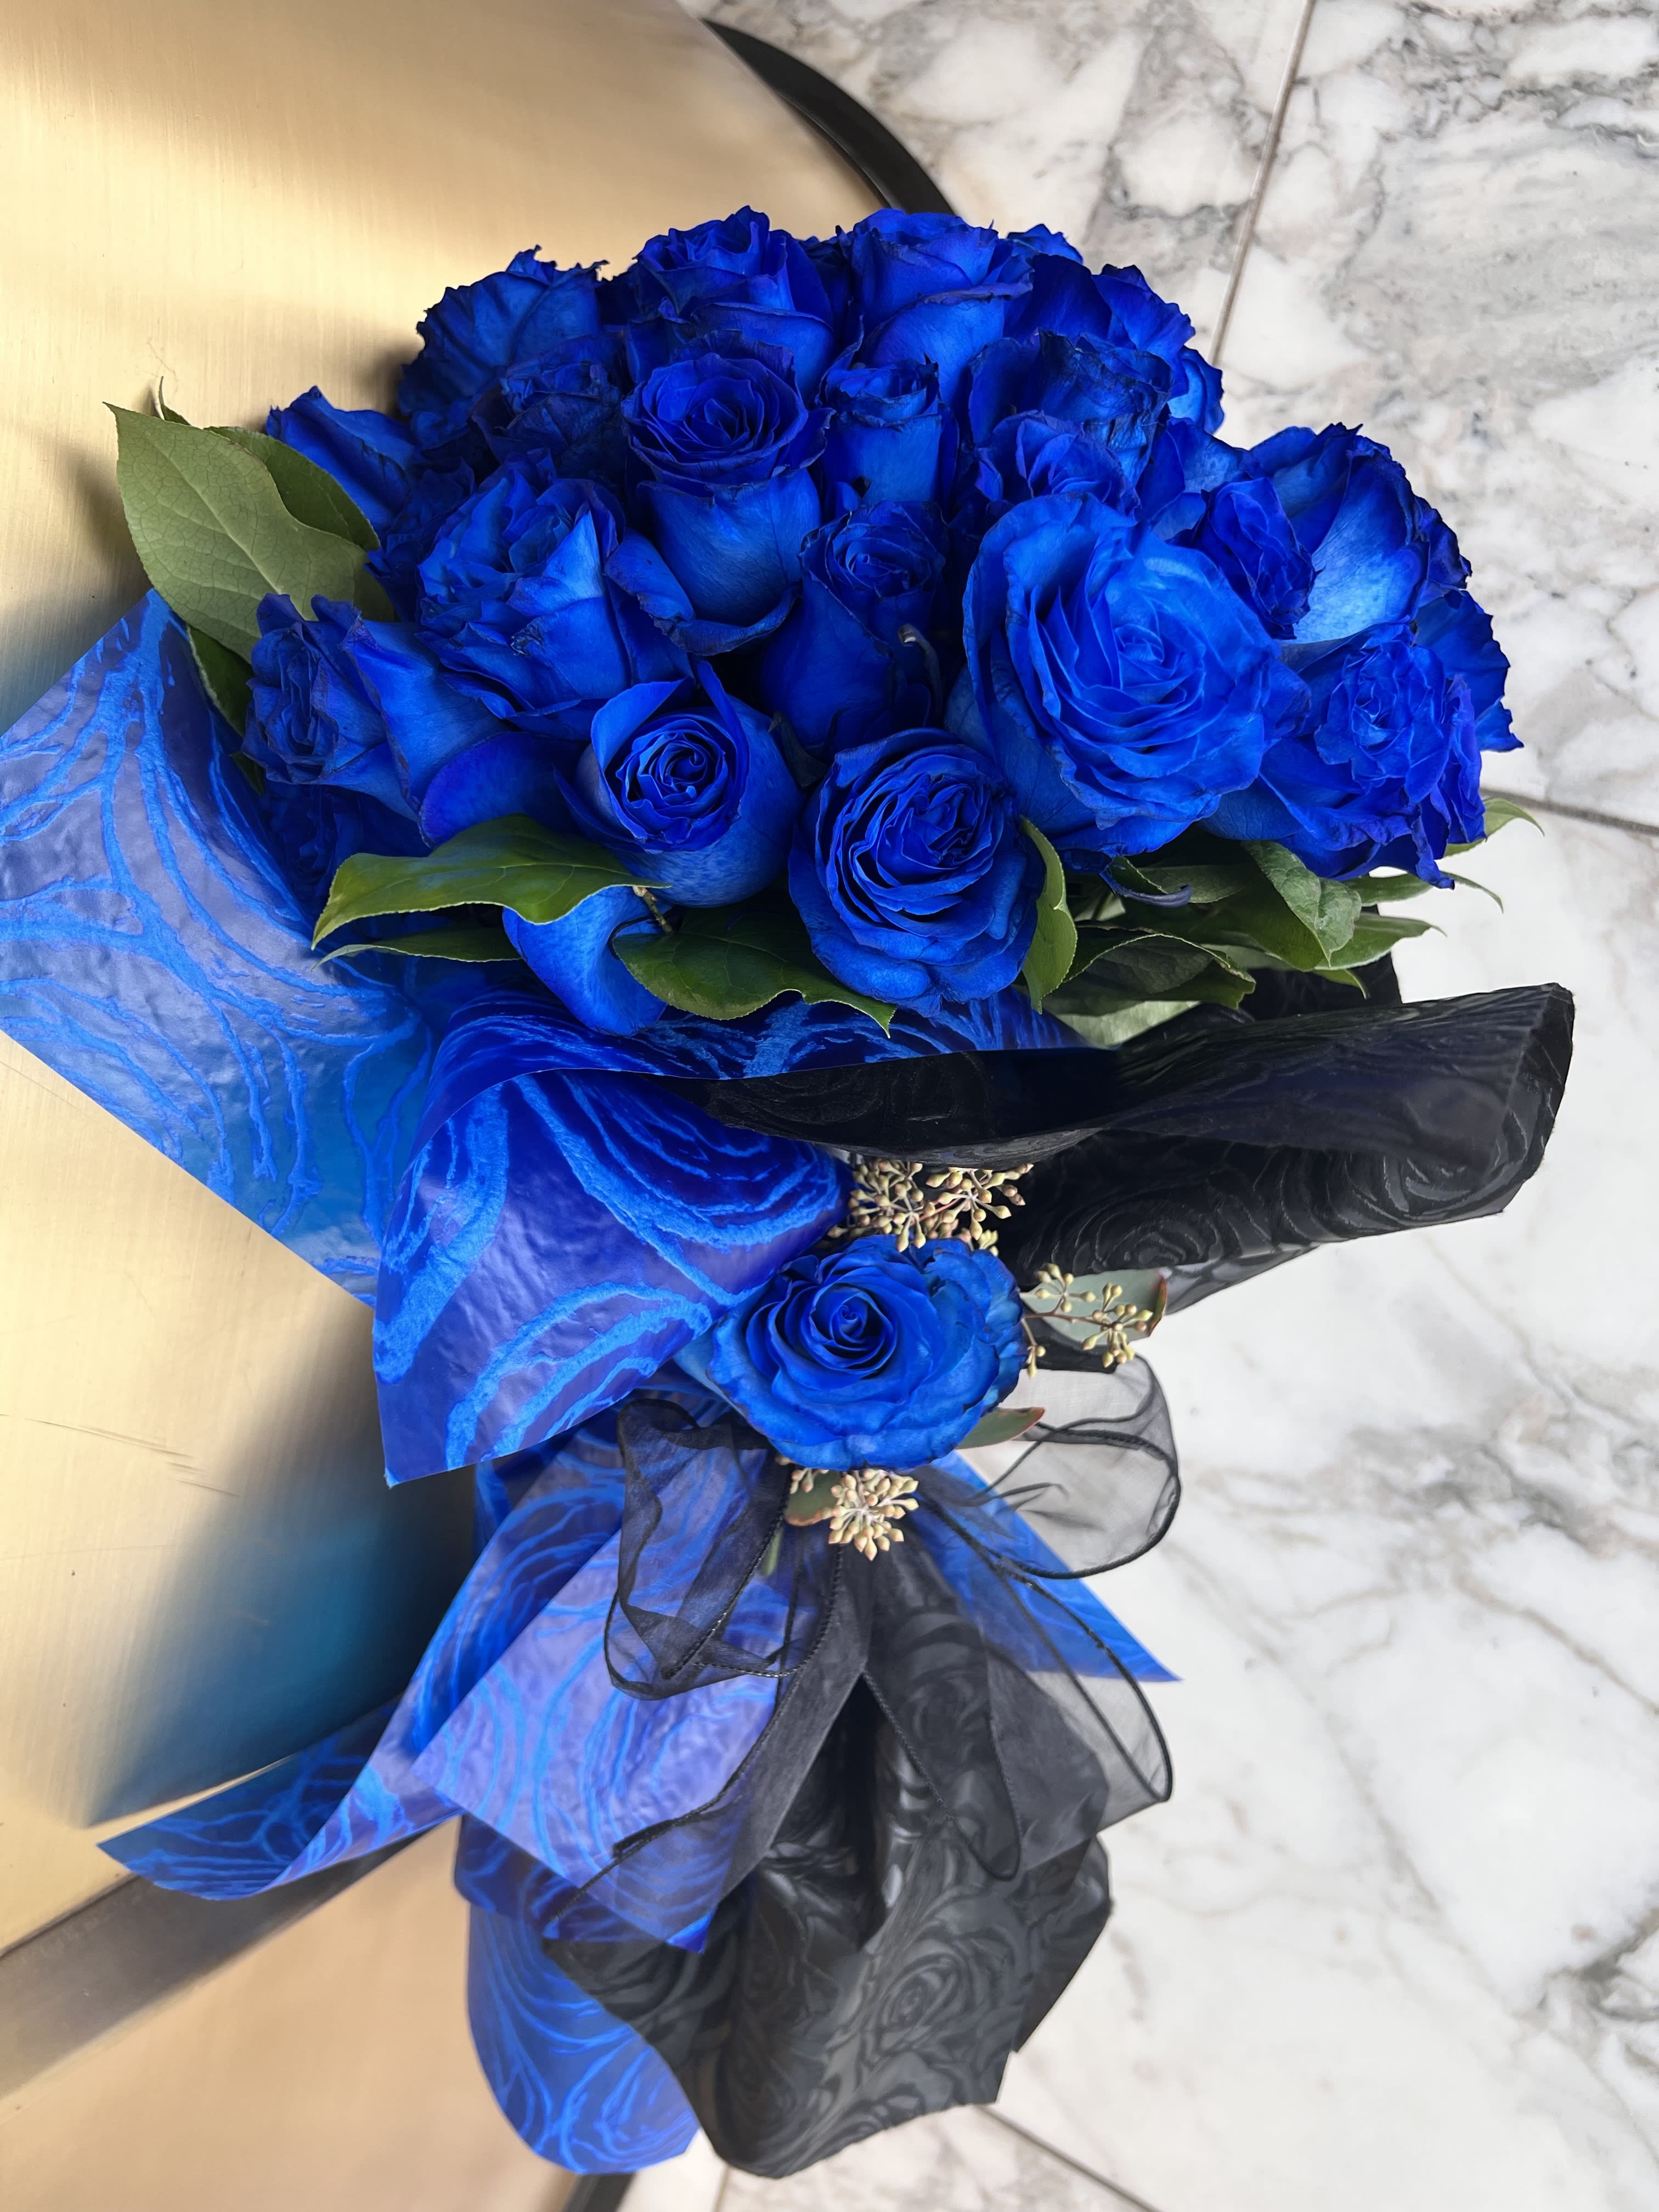 50 Premium Royal Blue Roses - Wrapped bouquet made with 50 premium royal blue roses. It’s a great gift presentation.